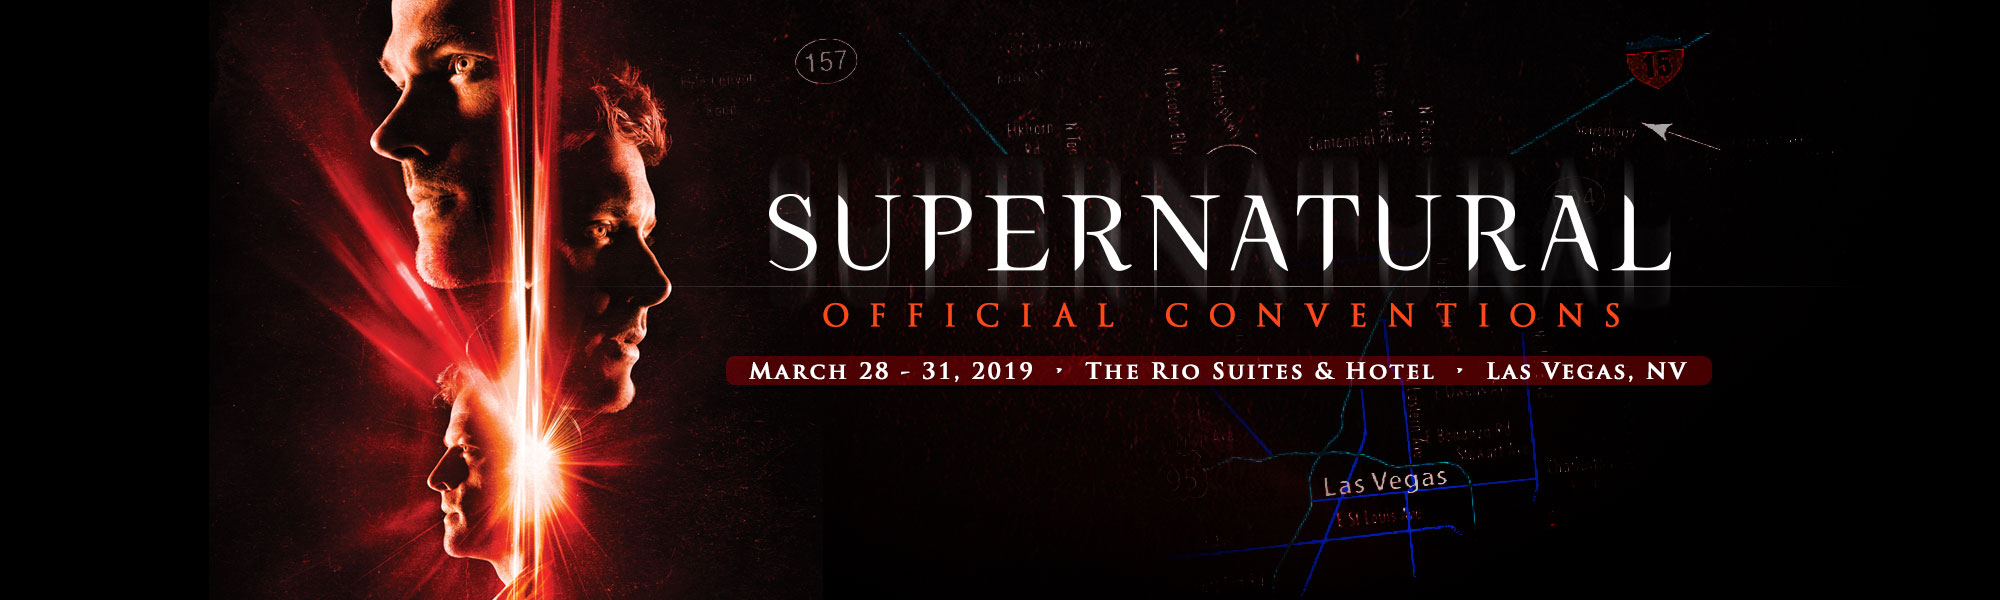 Creation Entertainment's Supernatural Offical Convention in Las Vegas